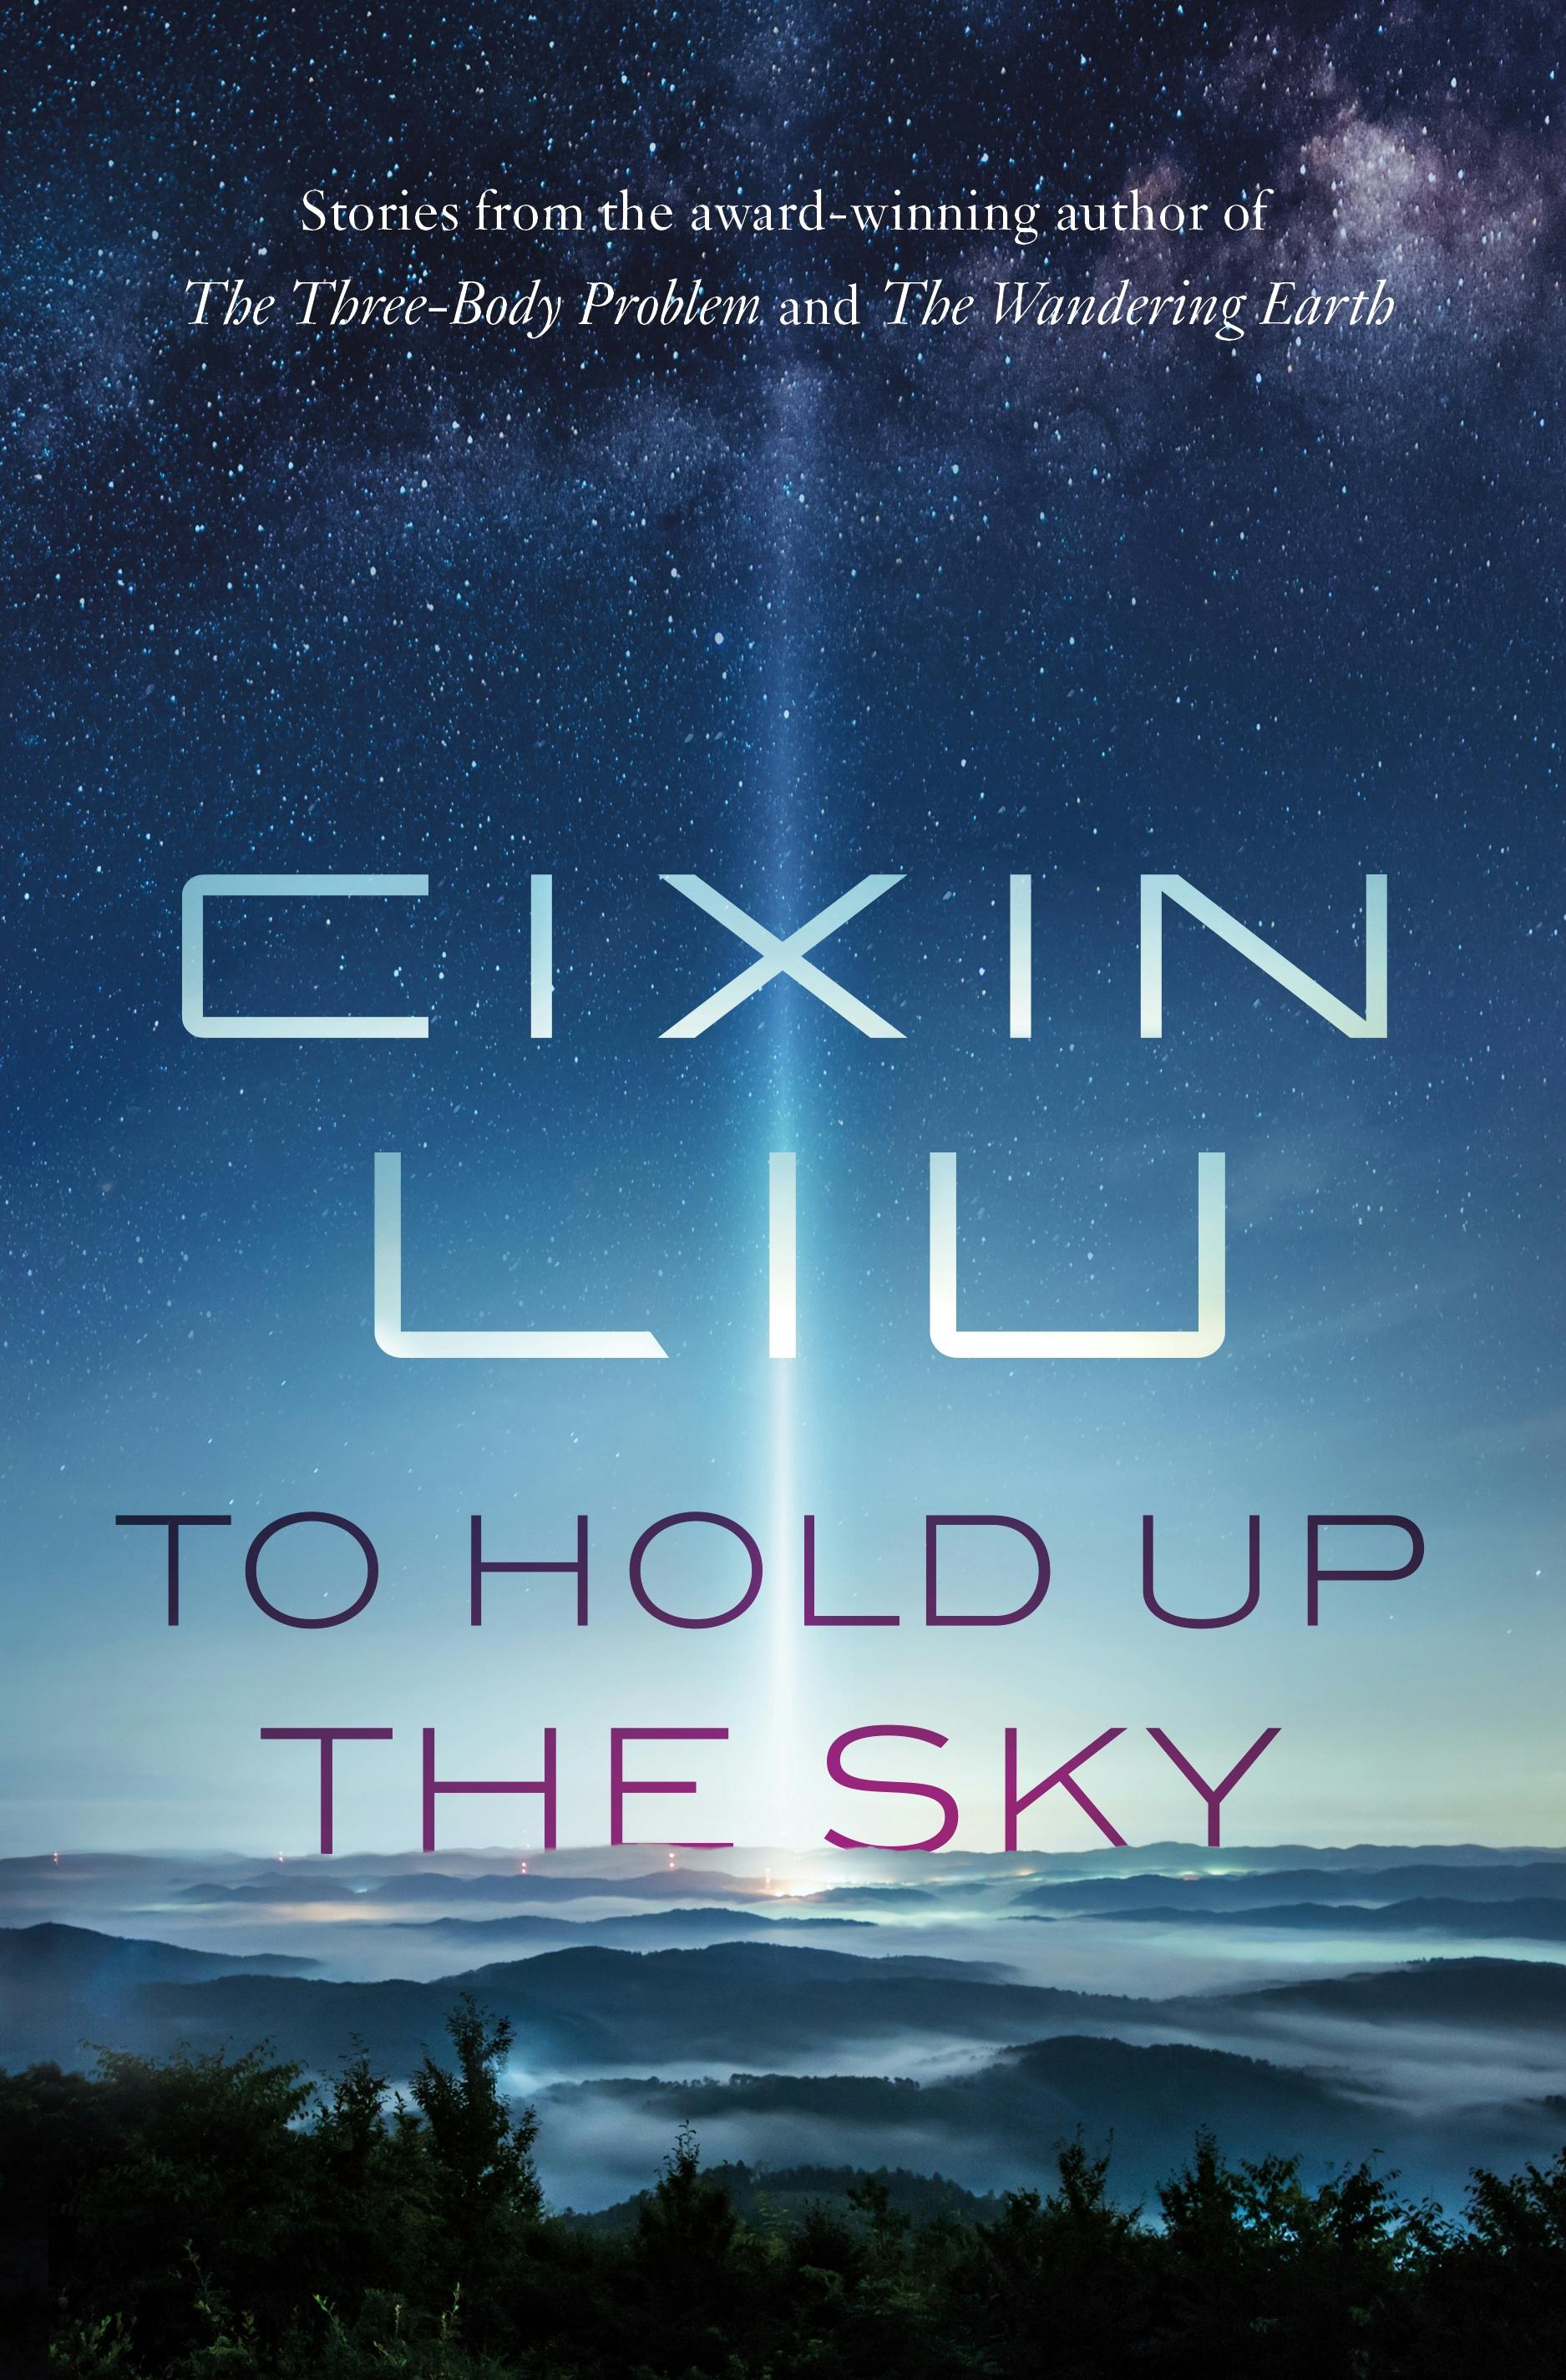 Cover for the book titled as: To Hold Up the Sky